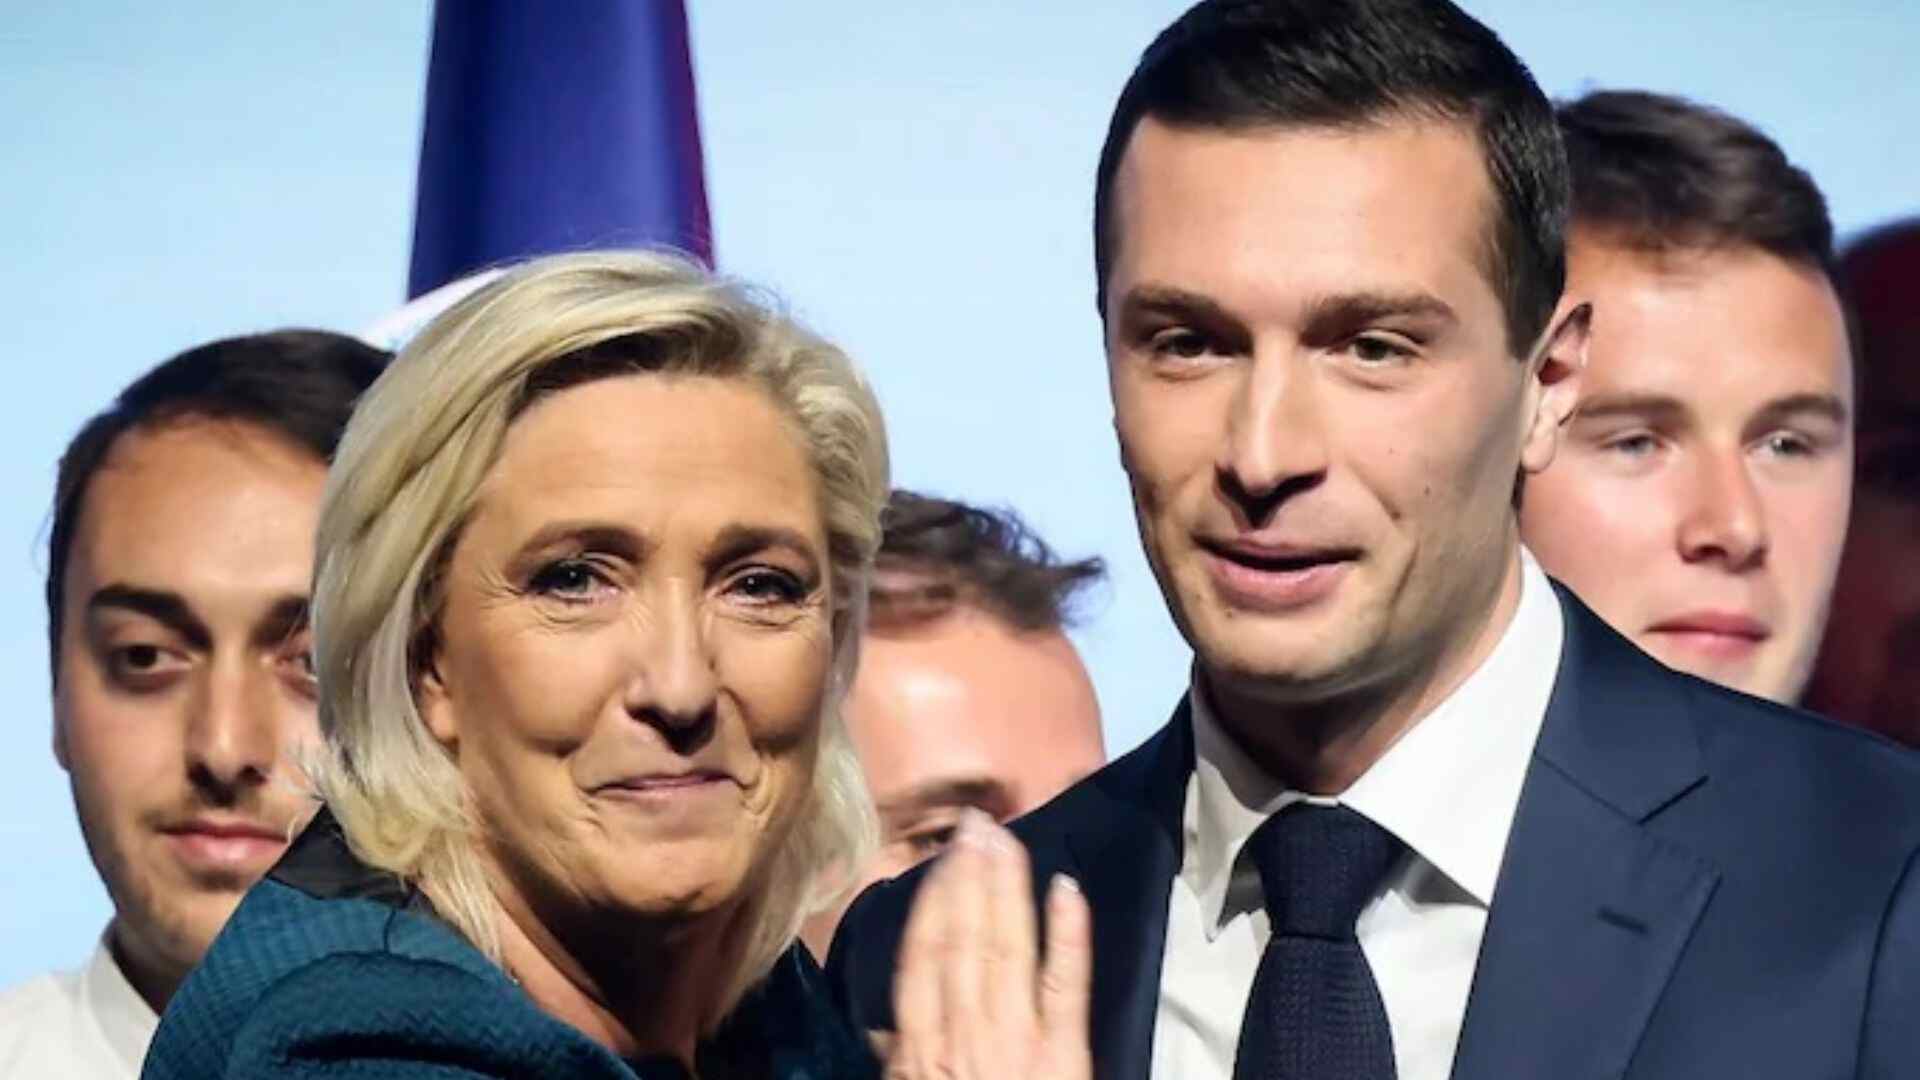 France Far-right National Rally leads in parliamentary elections, heads to crucial second round.